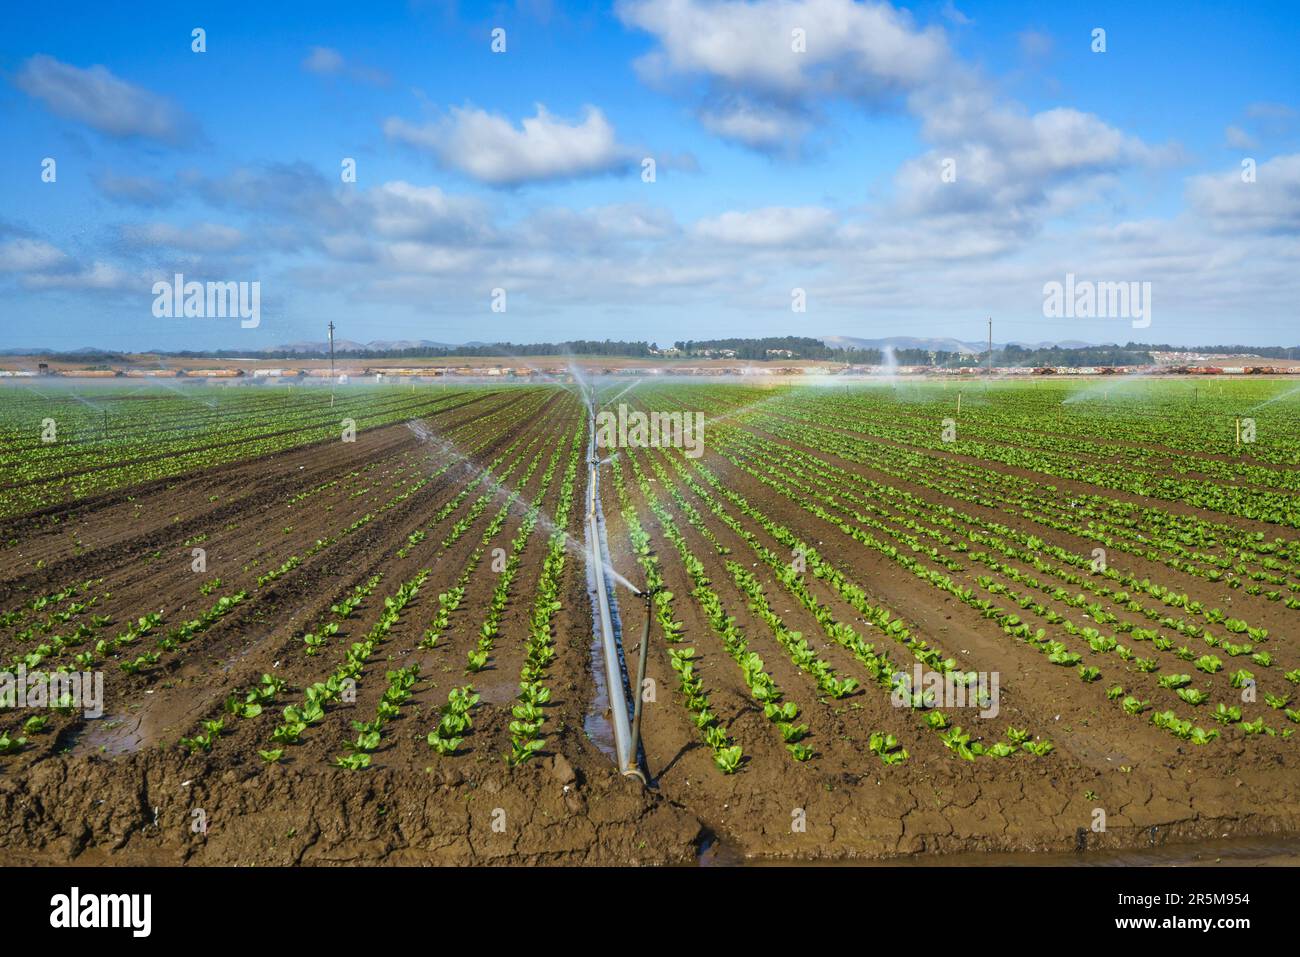 Watering agricultural field. Field irrigation sprinkler system waters rows of lettuce crops on farmland in Santa Barbara County, California Stock Photo